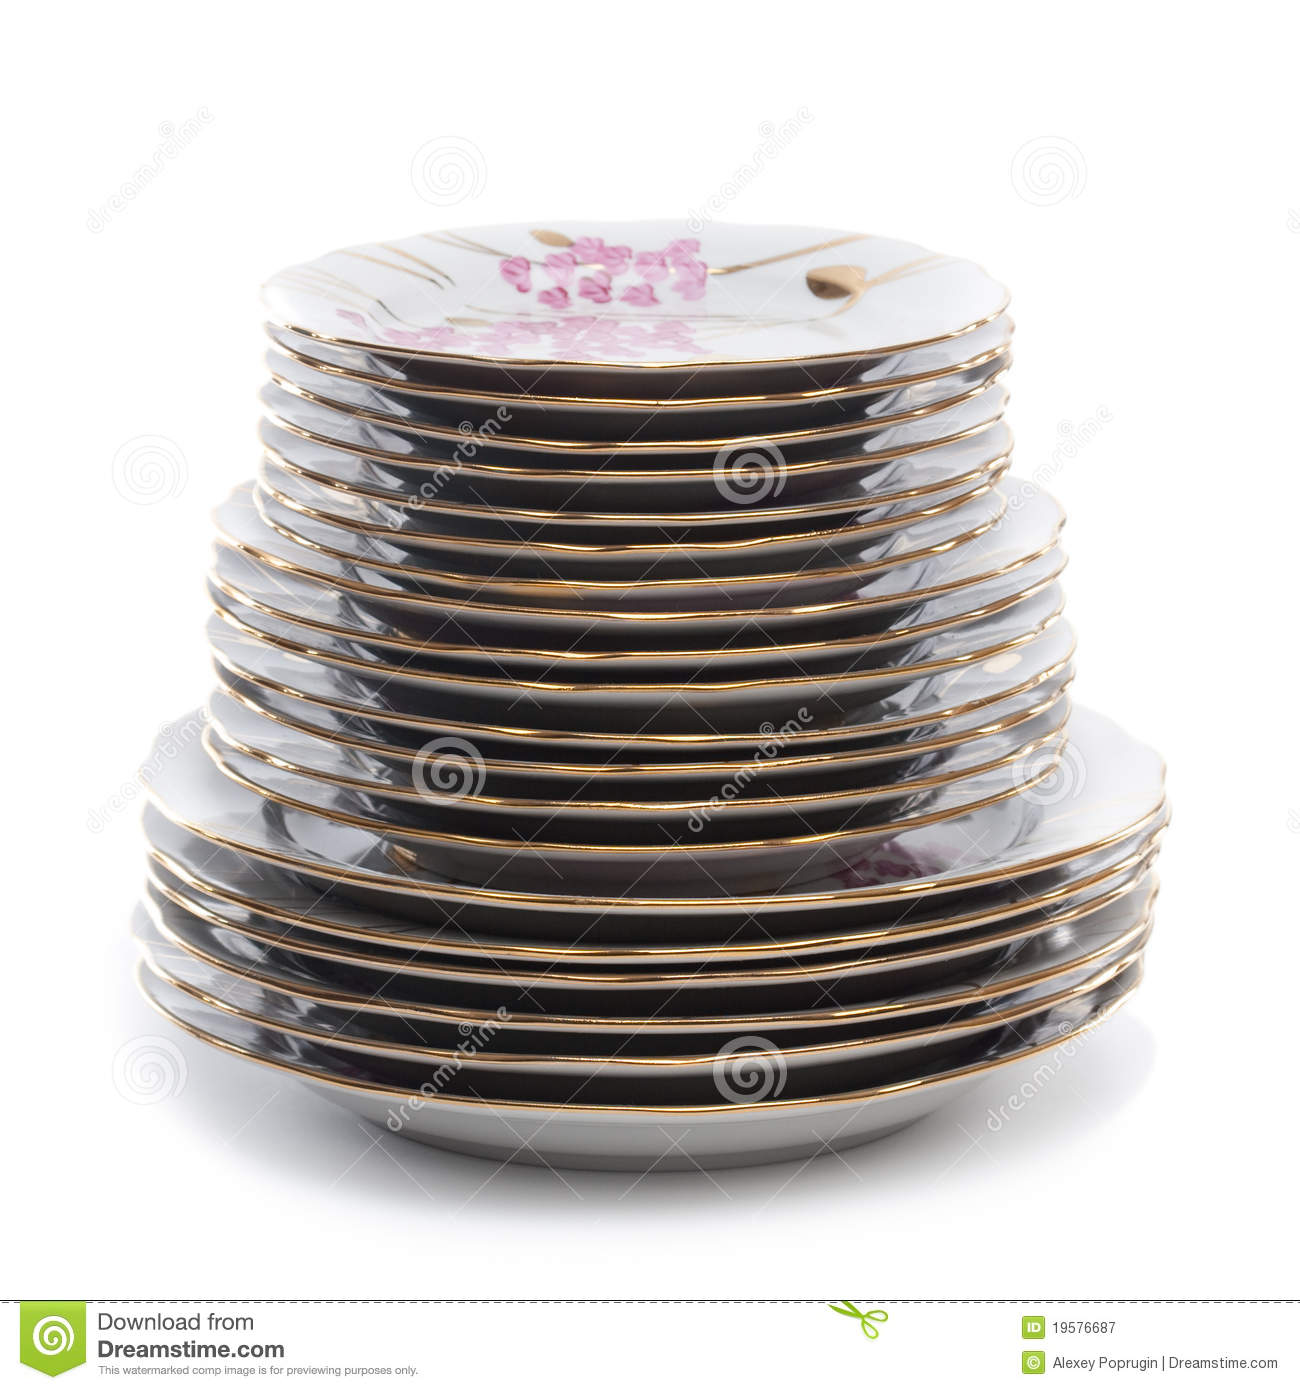 Stack Of Plates Royalty Free Stock Photography   Image  19576687